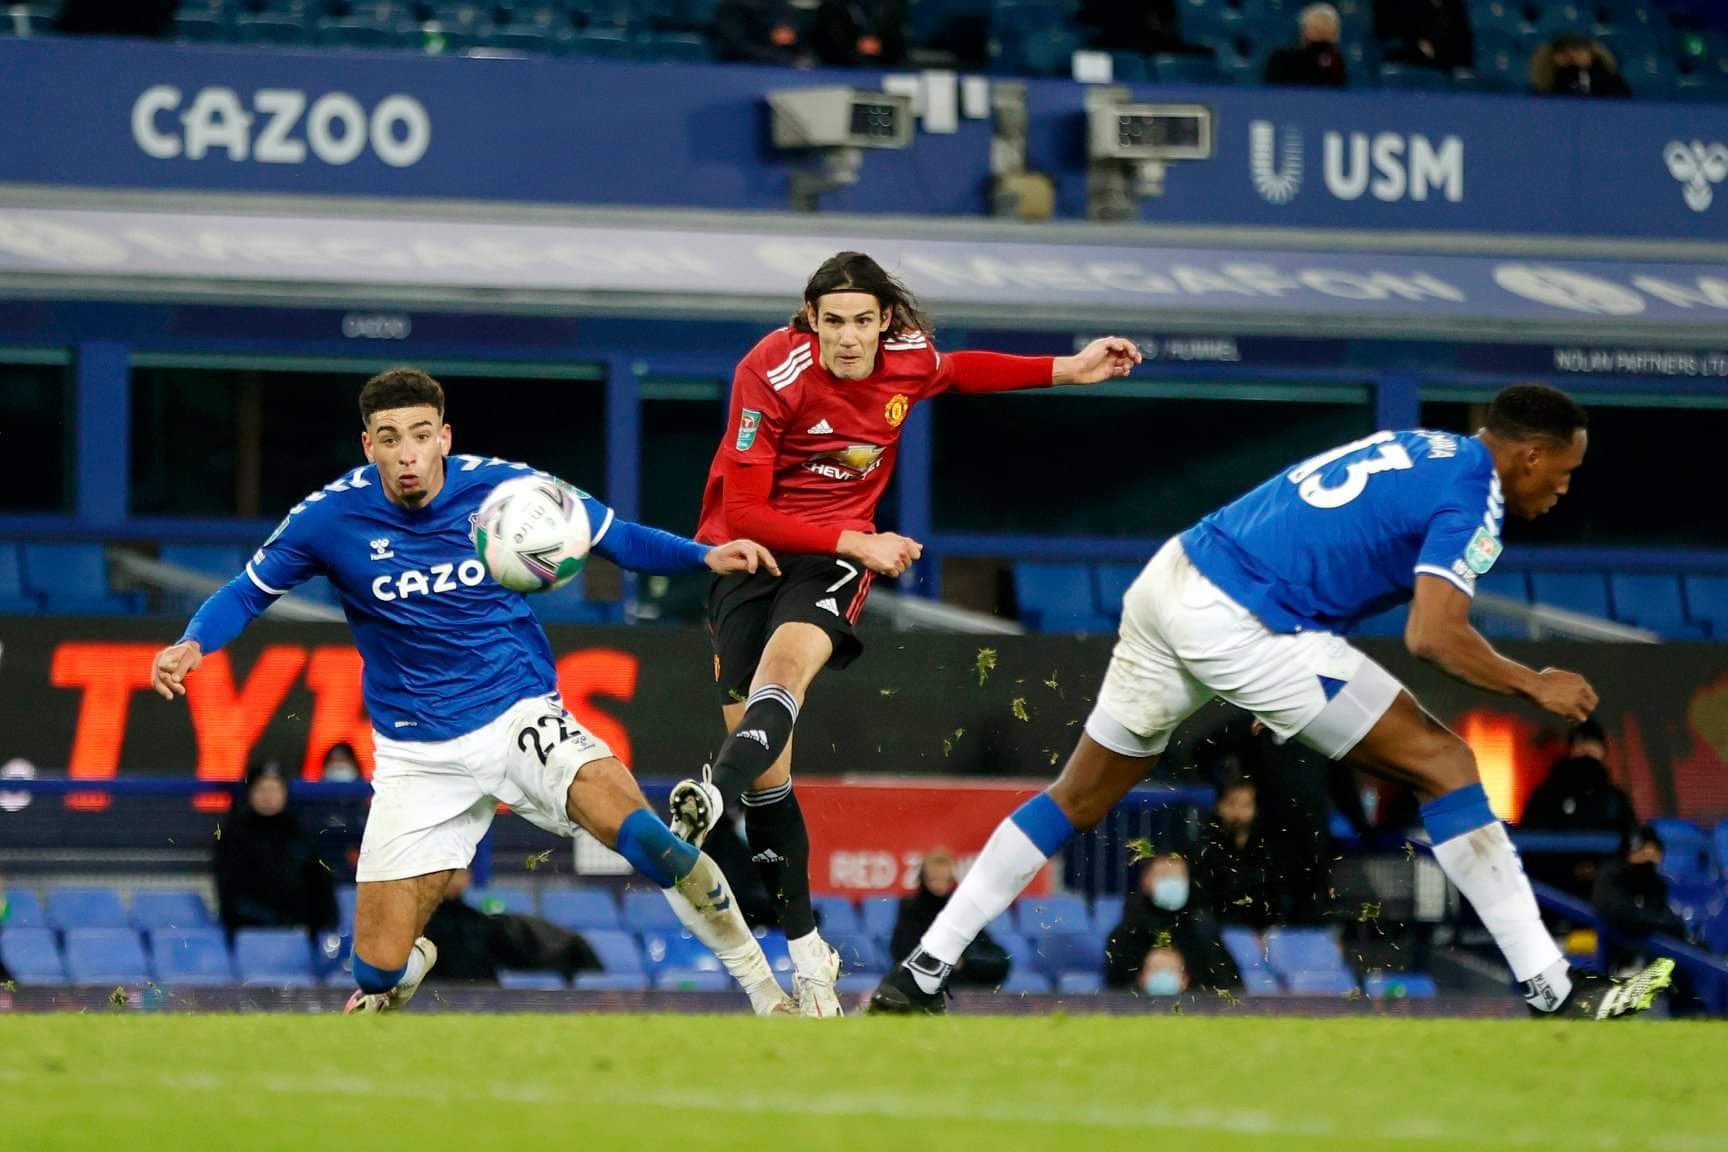 Iwobi In Action As Man United End Everton’s League Cup Hopes